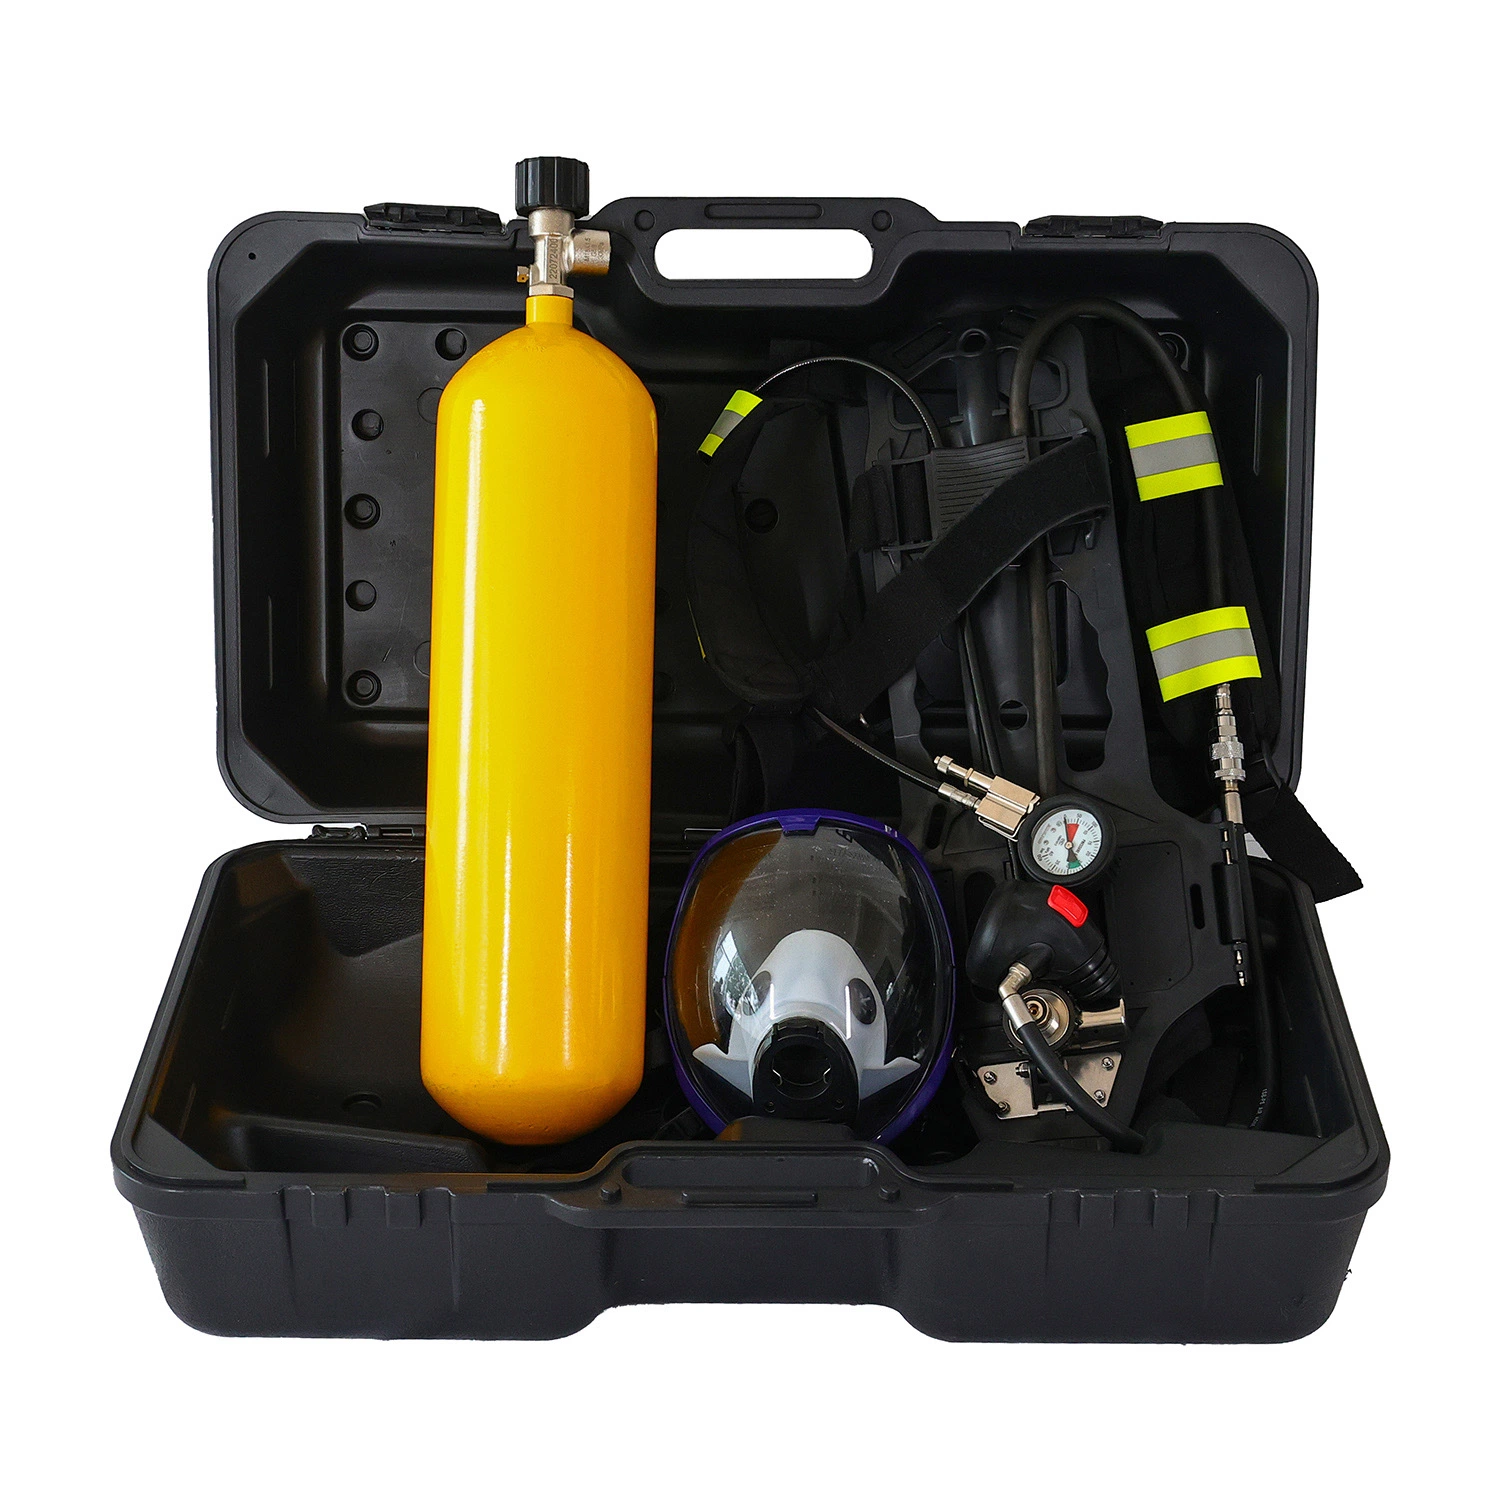 Get The Best Protection with Our Advanced Positive Pressure Air Breathing Apparatus